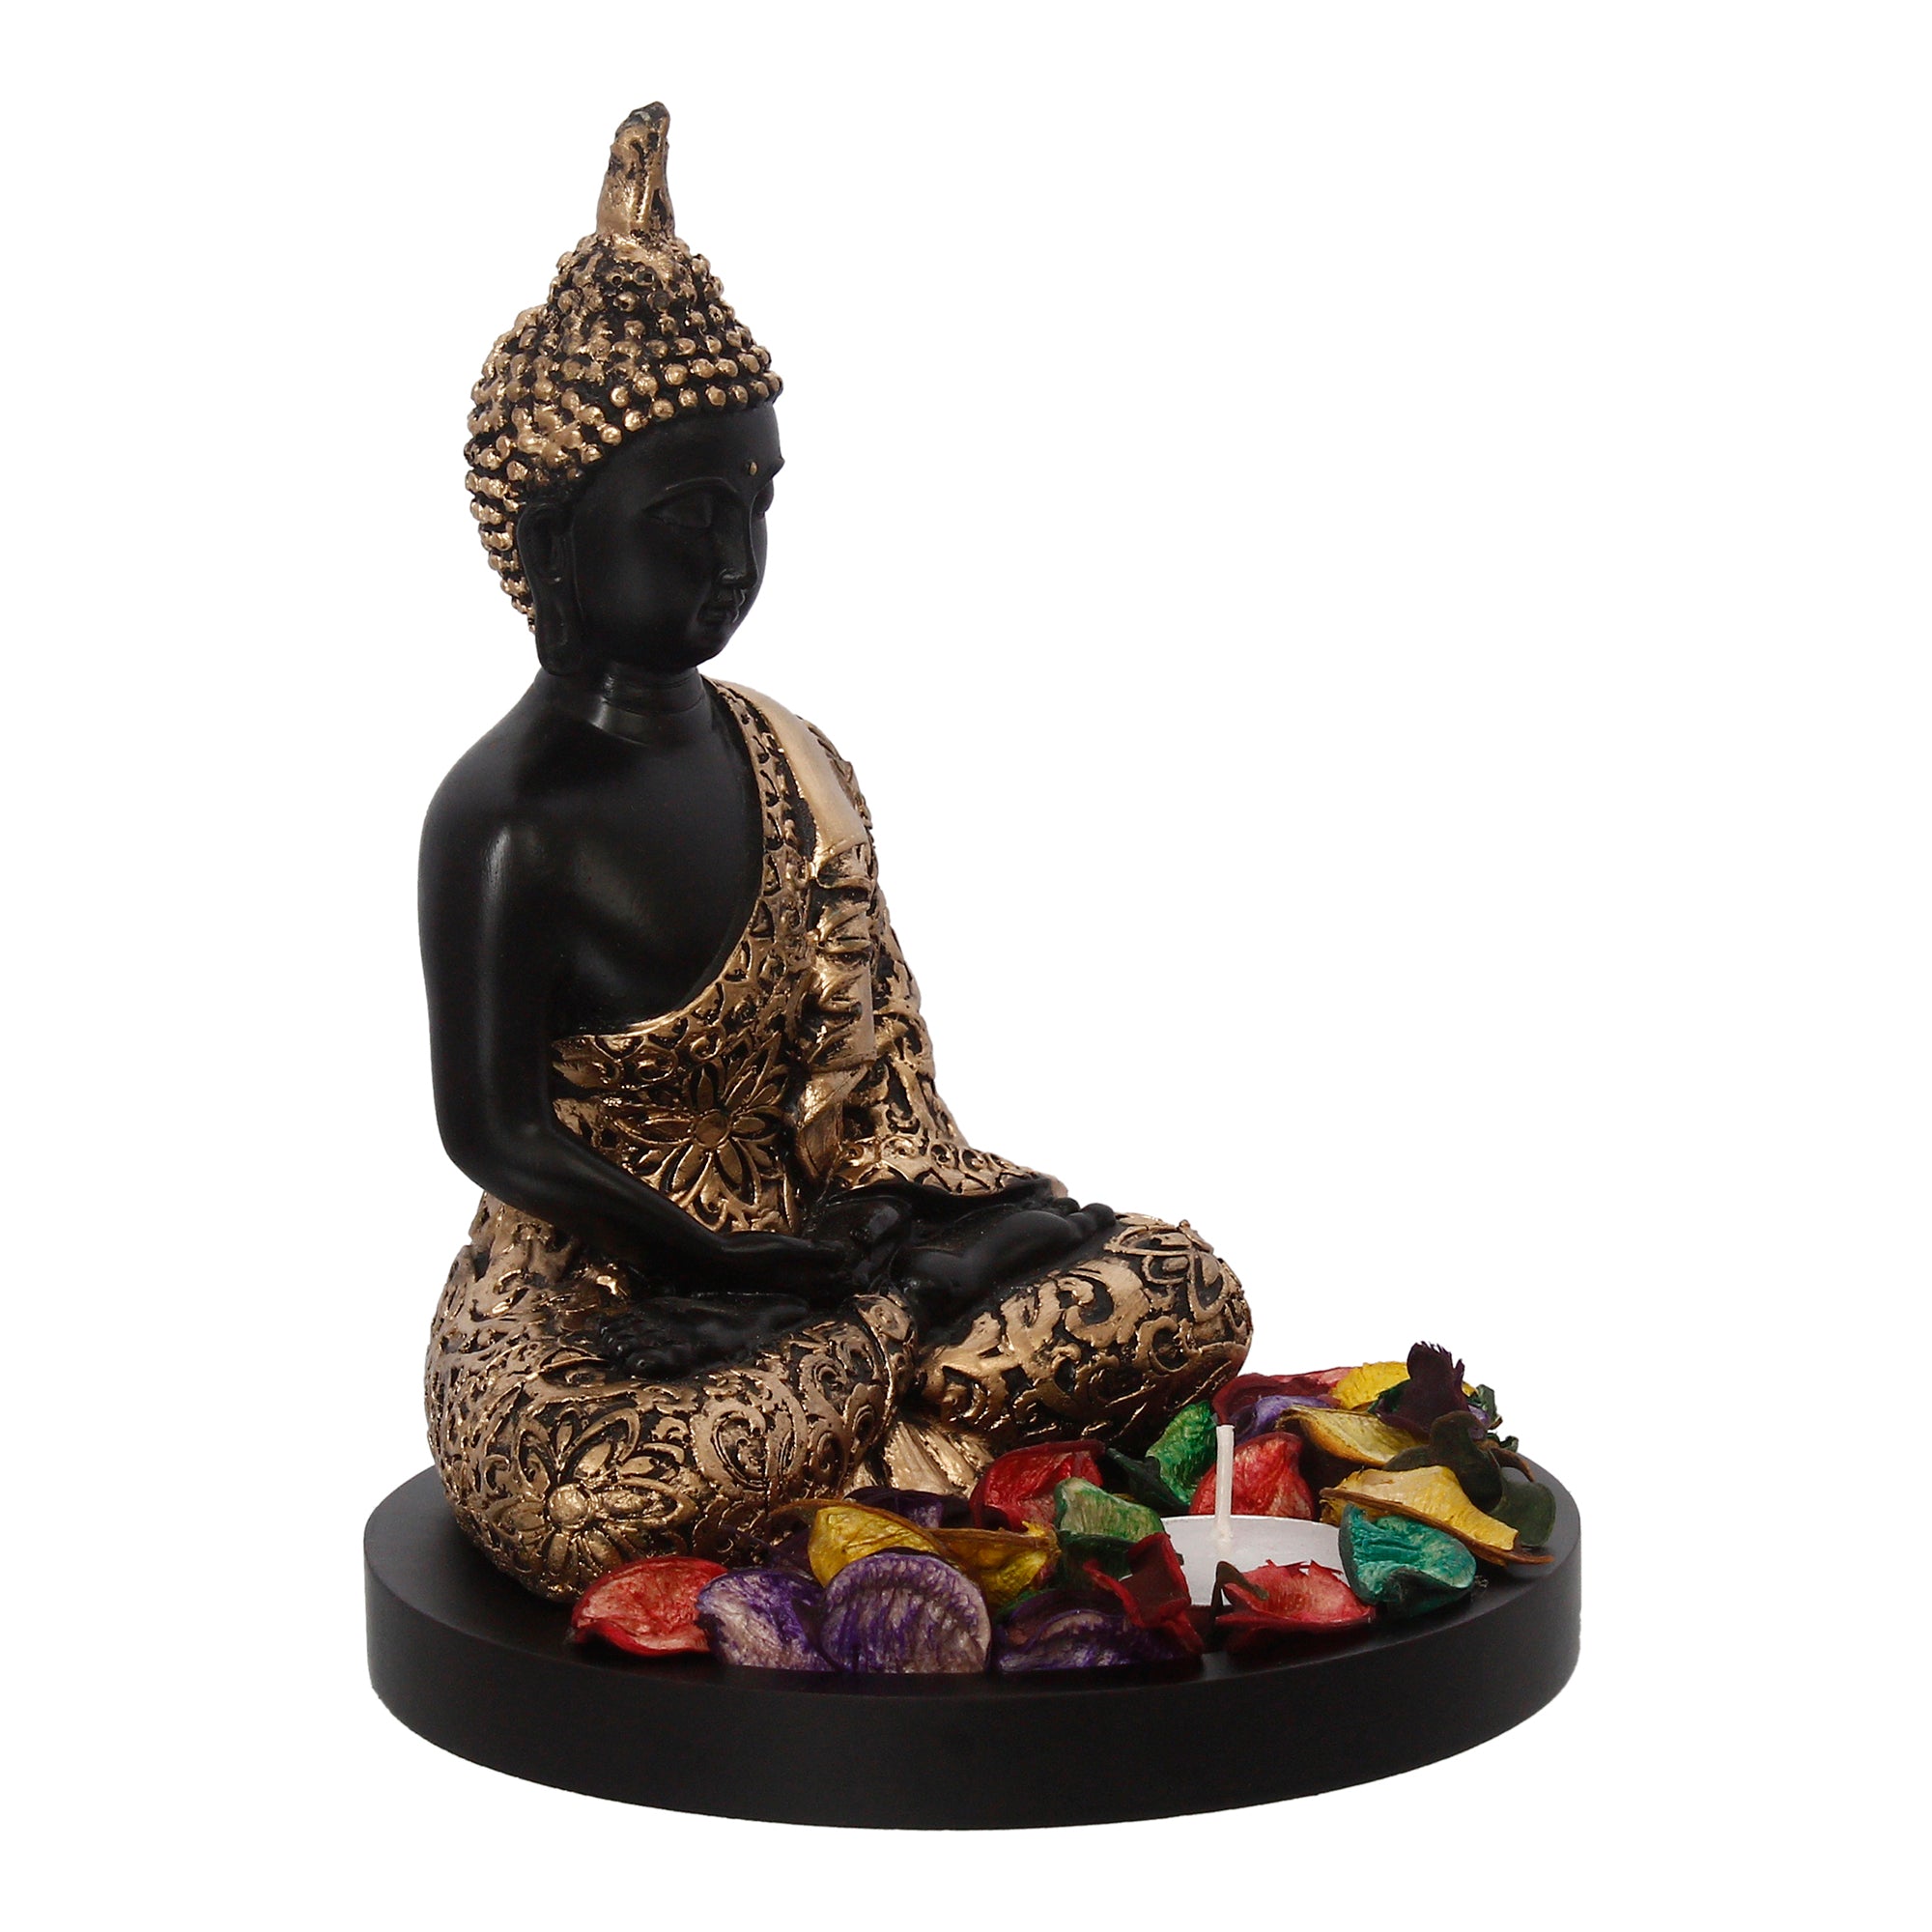 Handcrafted Meditating Golden Buddha Statue with Wooden Base, Fragranced Petals and Tealight 4